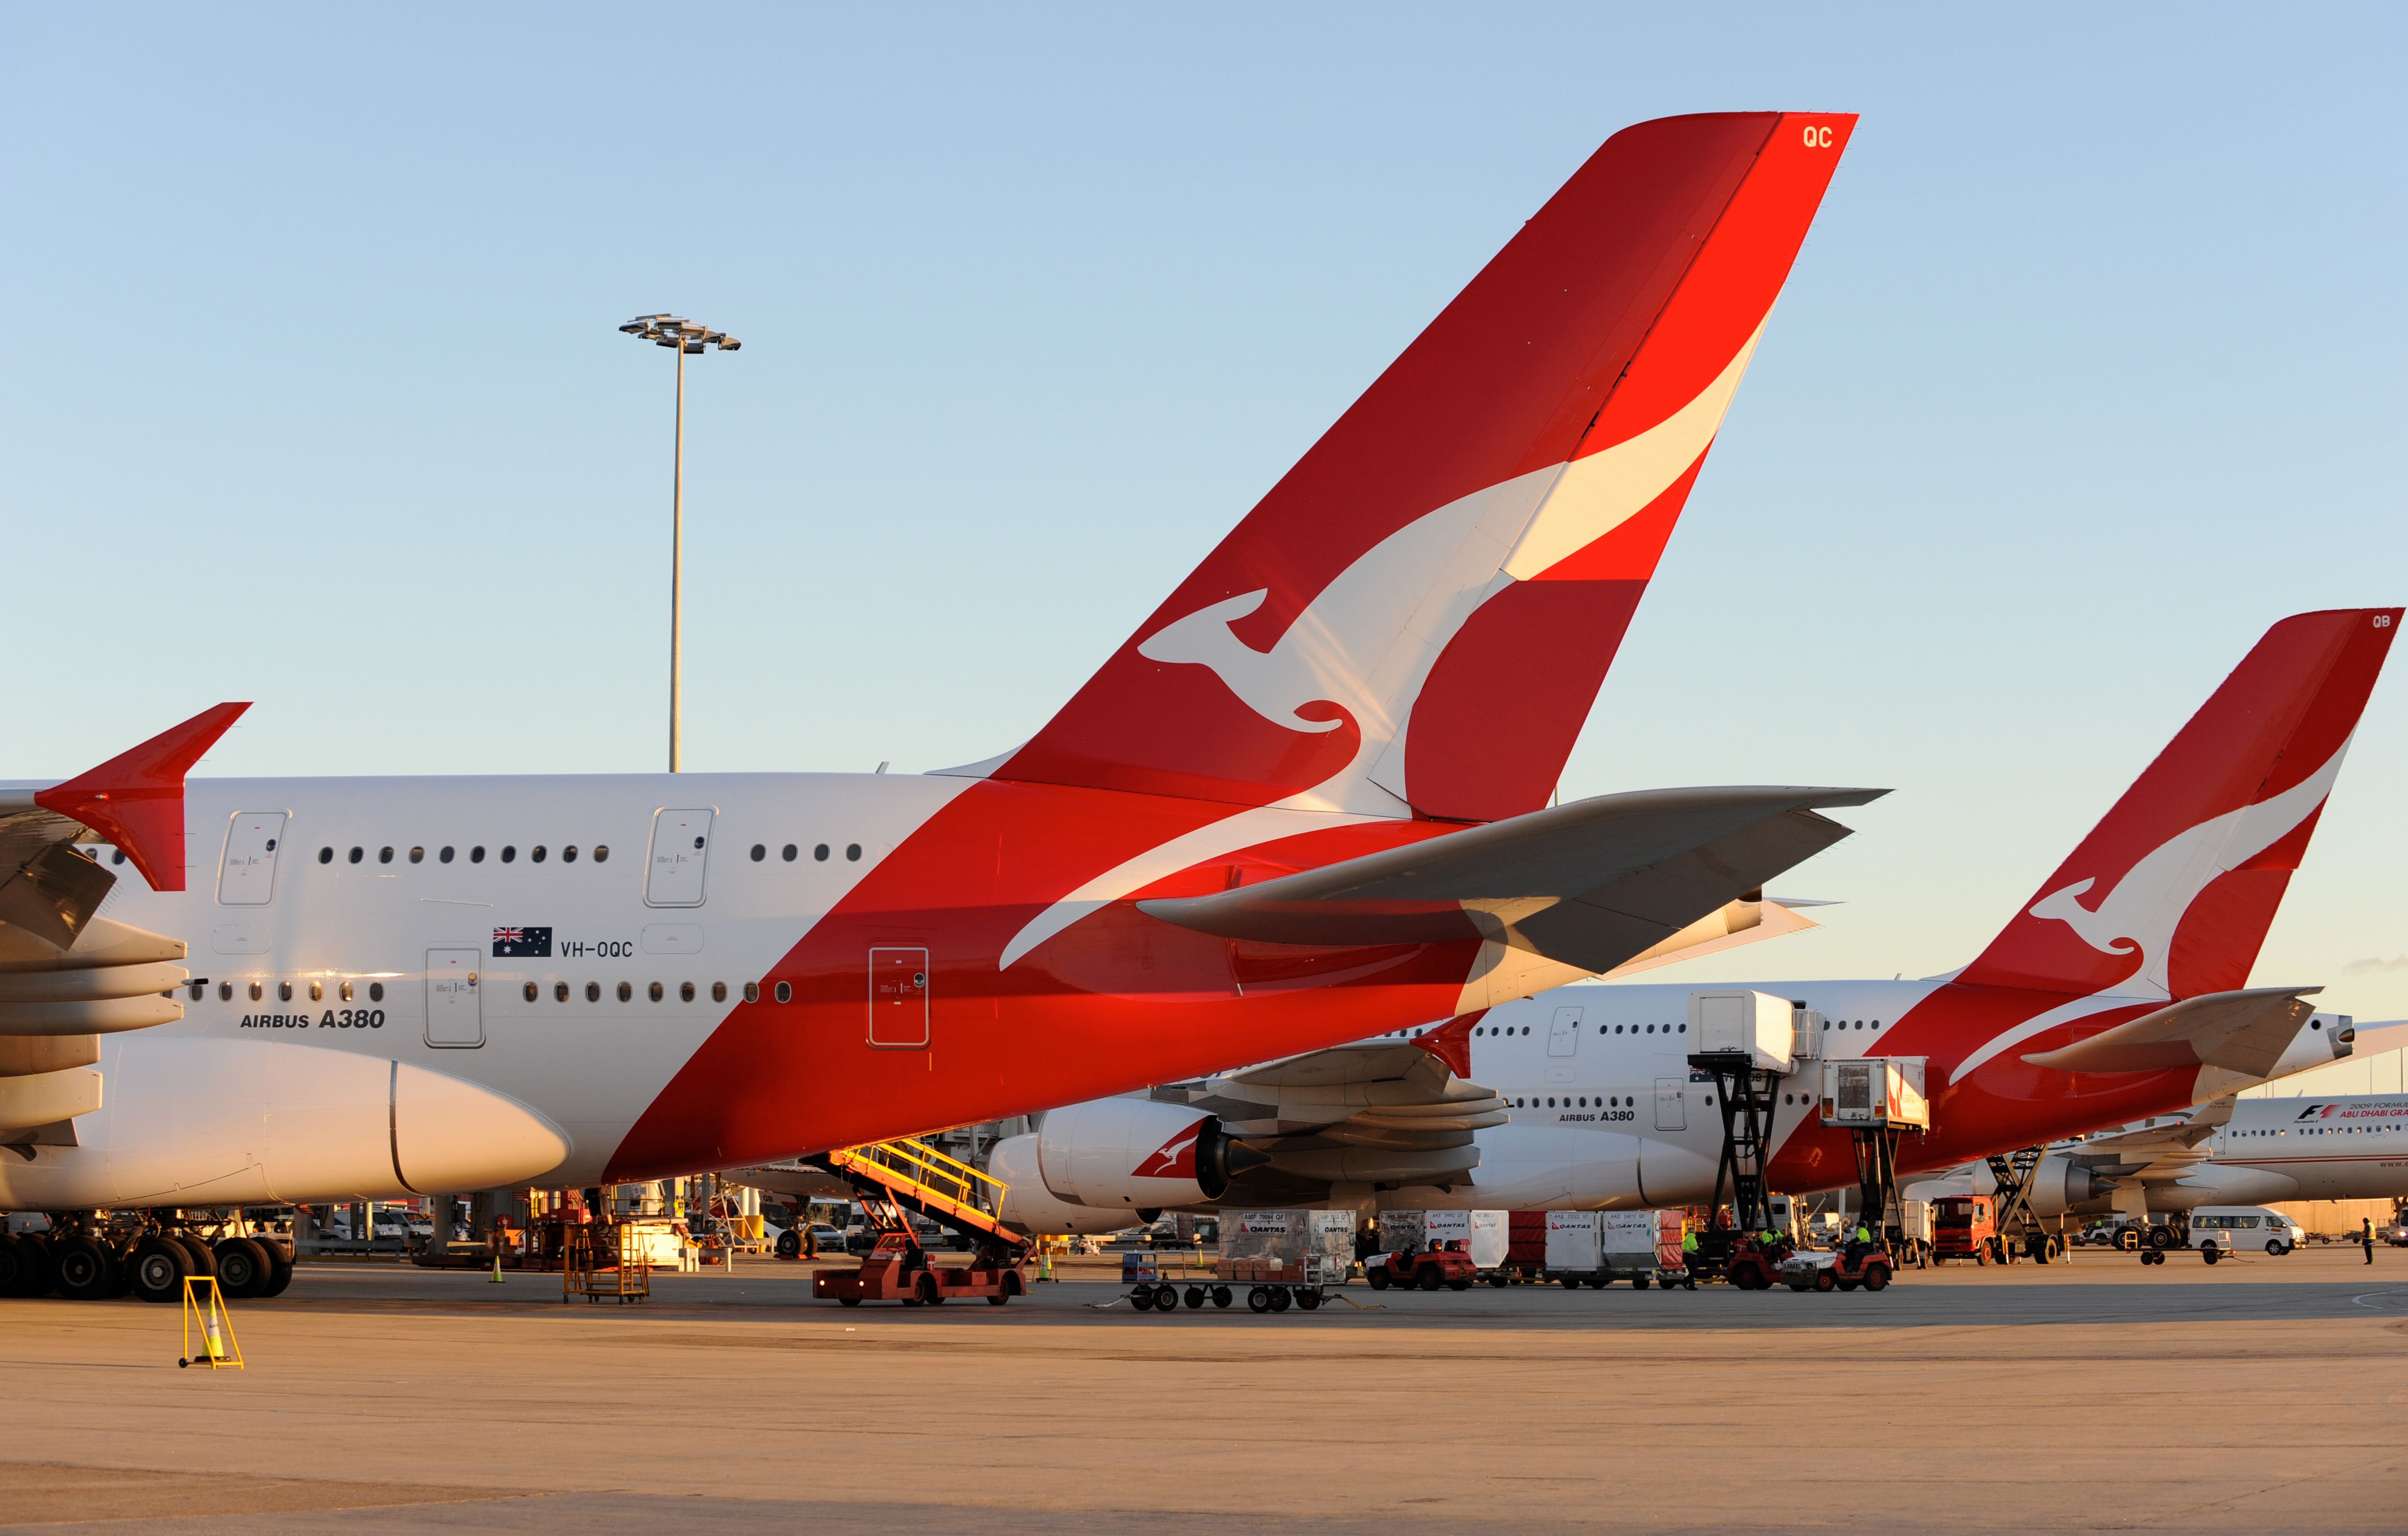 Two Qantas Airbus A380 parked on stand